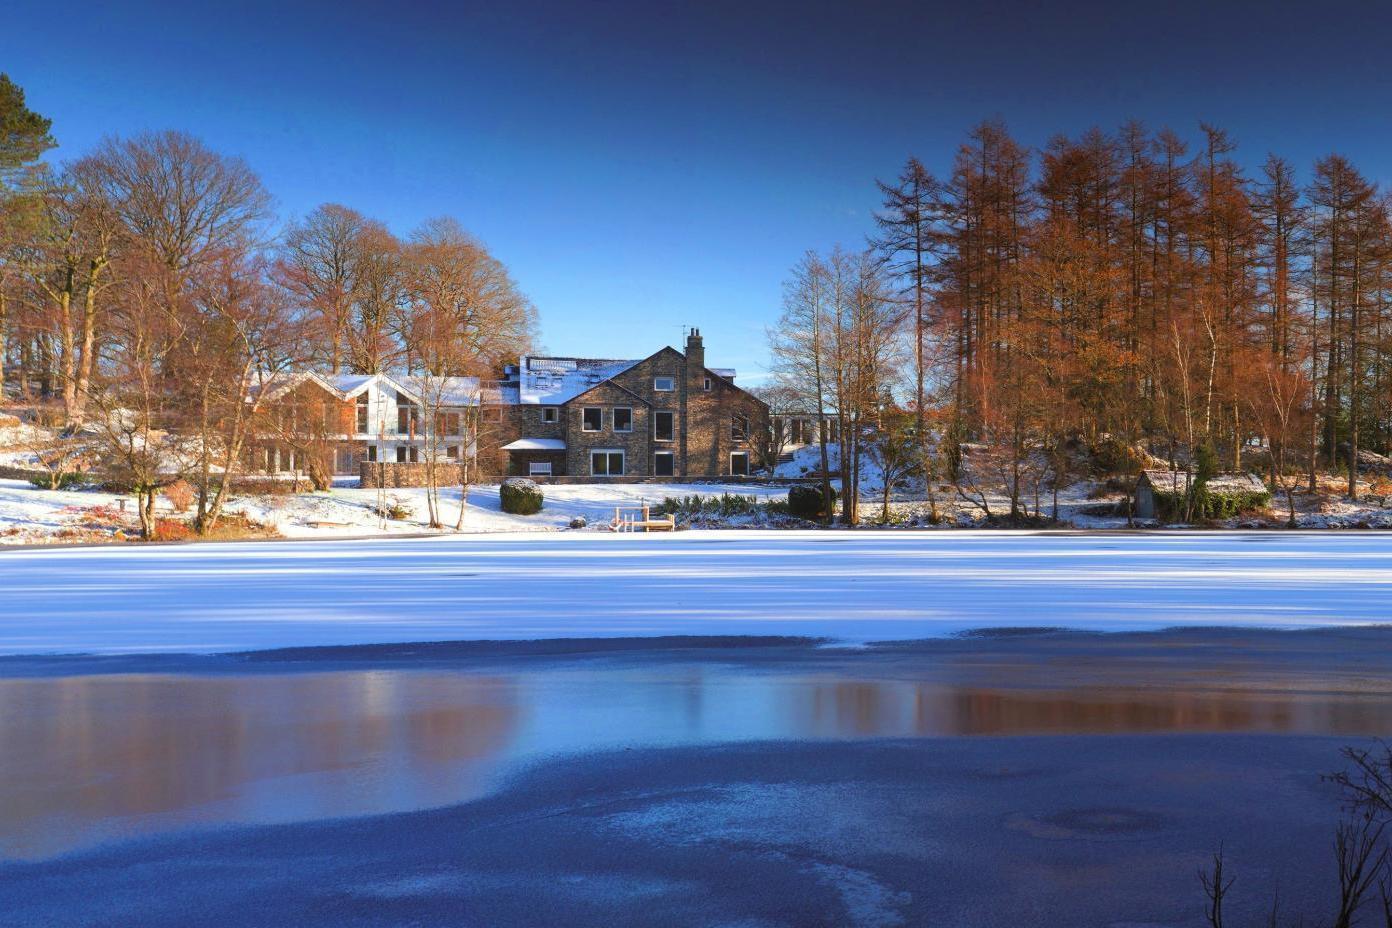 Gilpin Lake House in winter